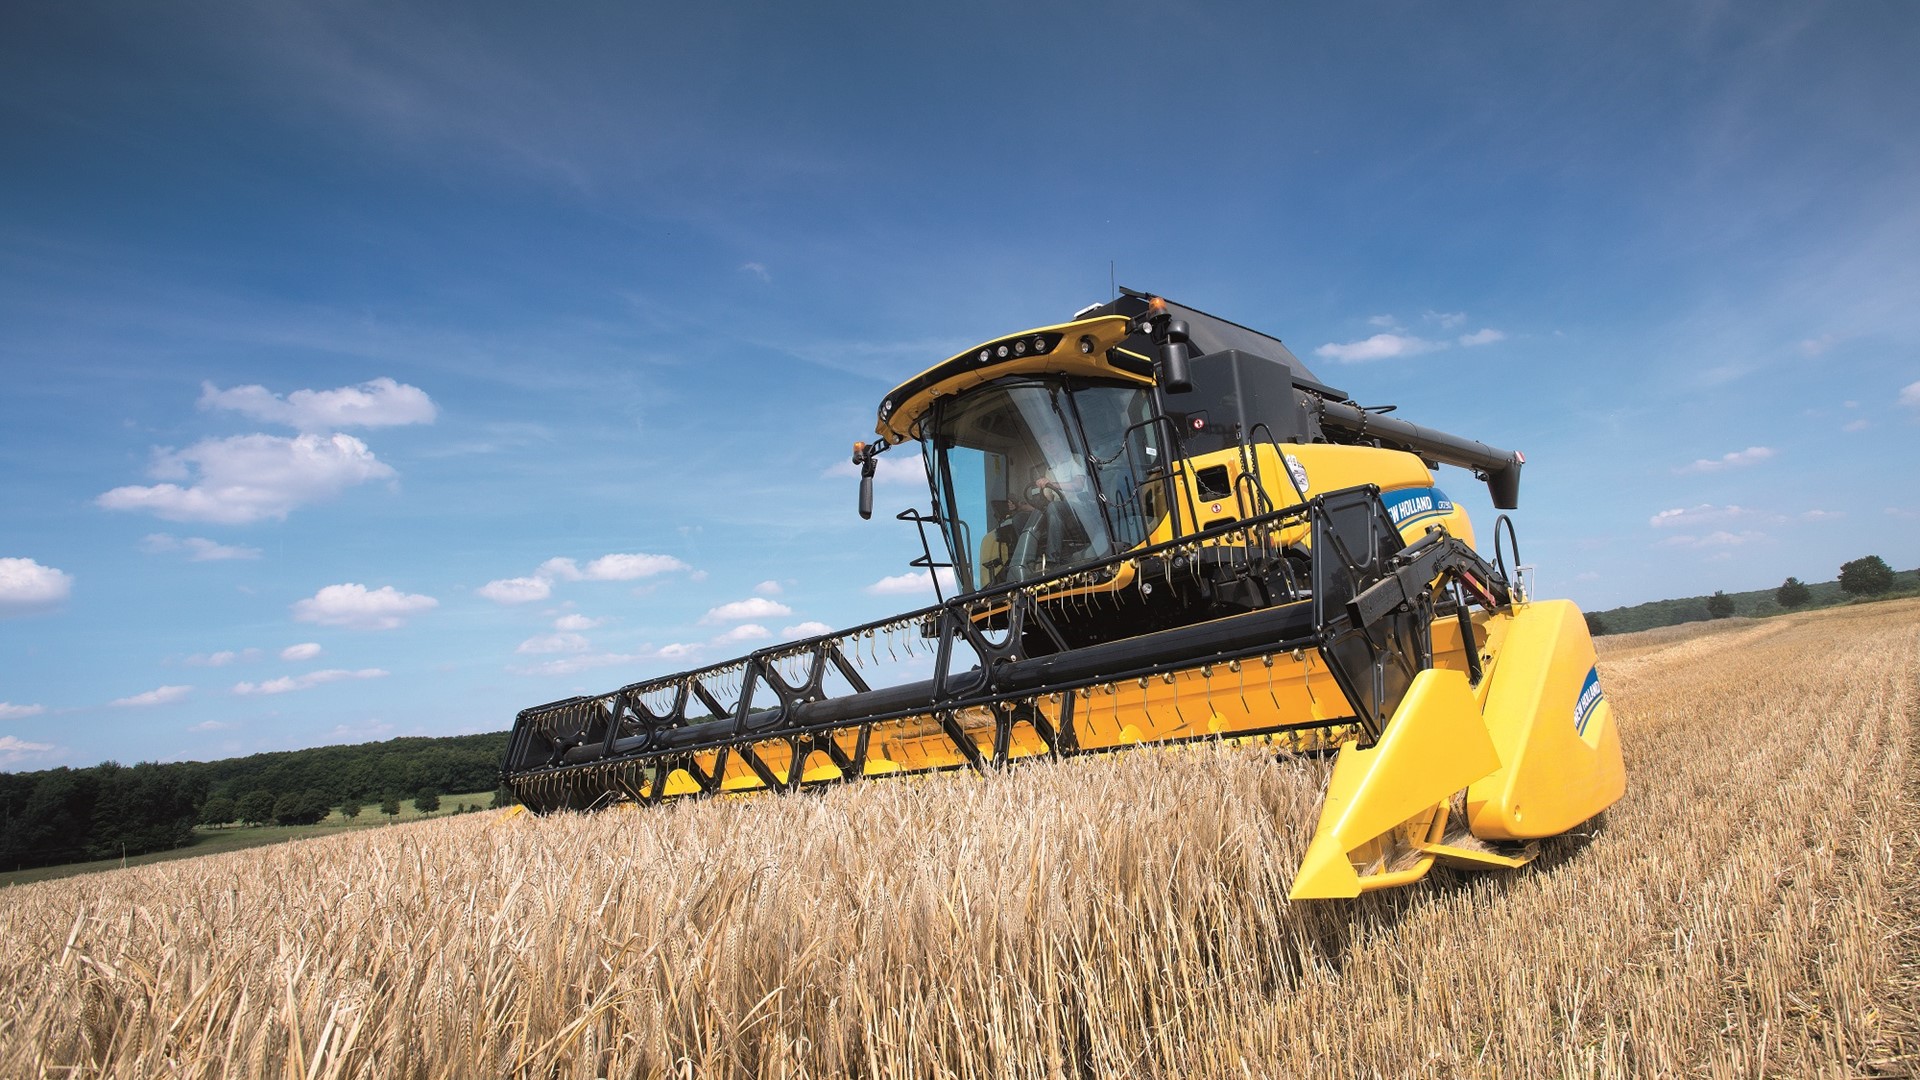 New Holland CR7.90 Combine Harvester in the Field